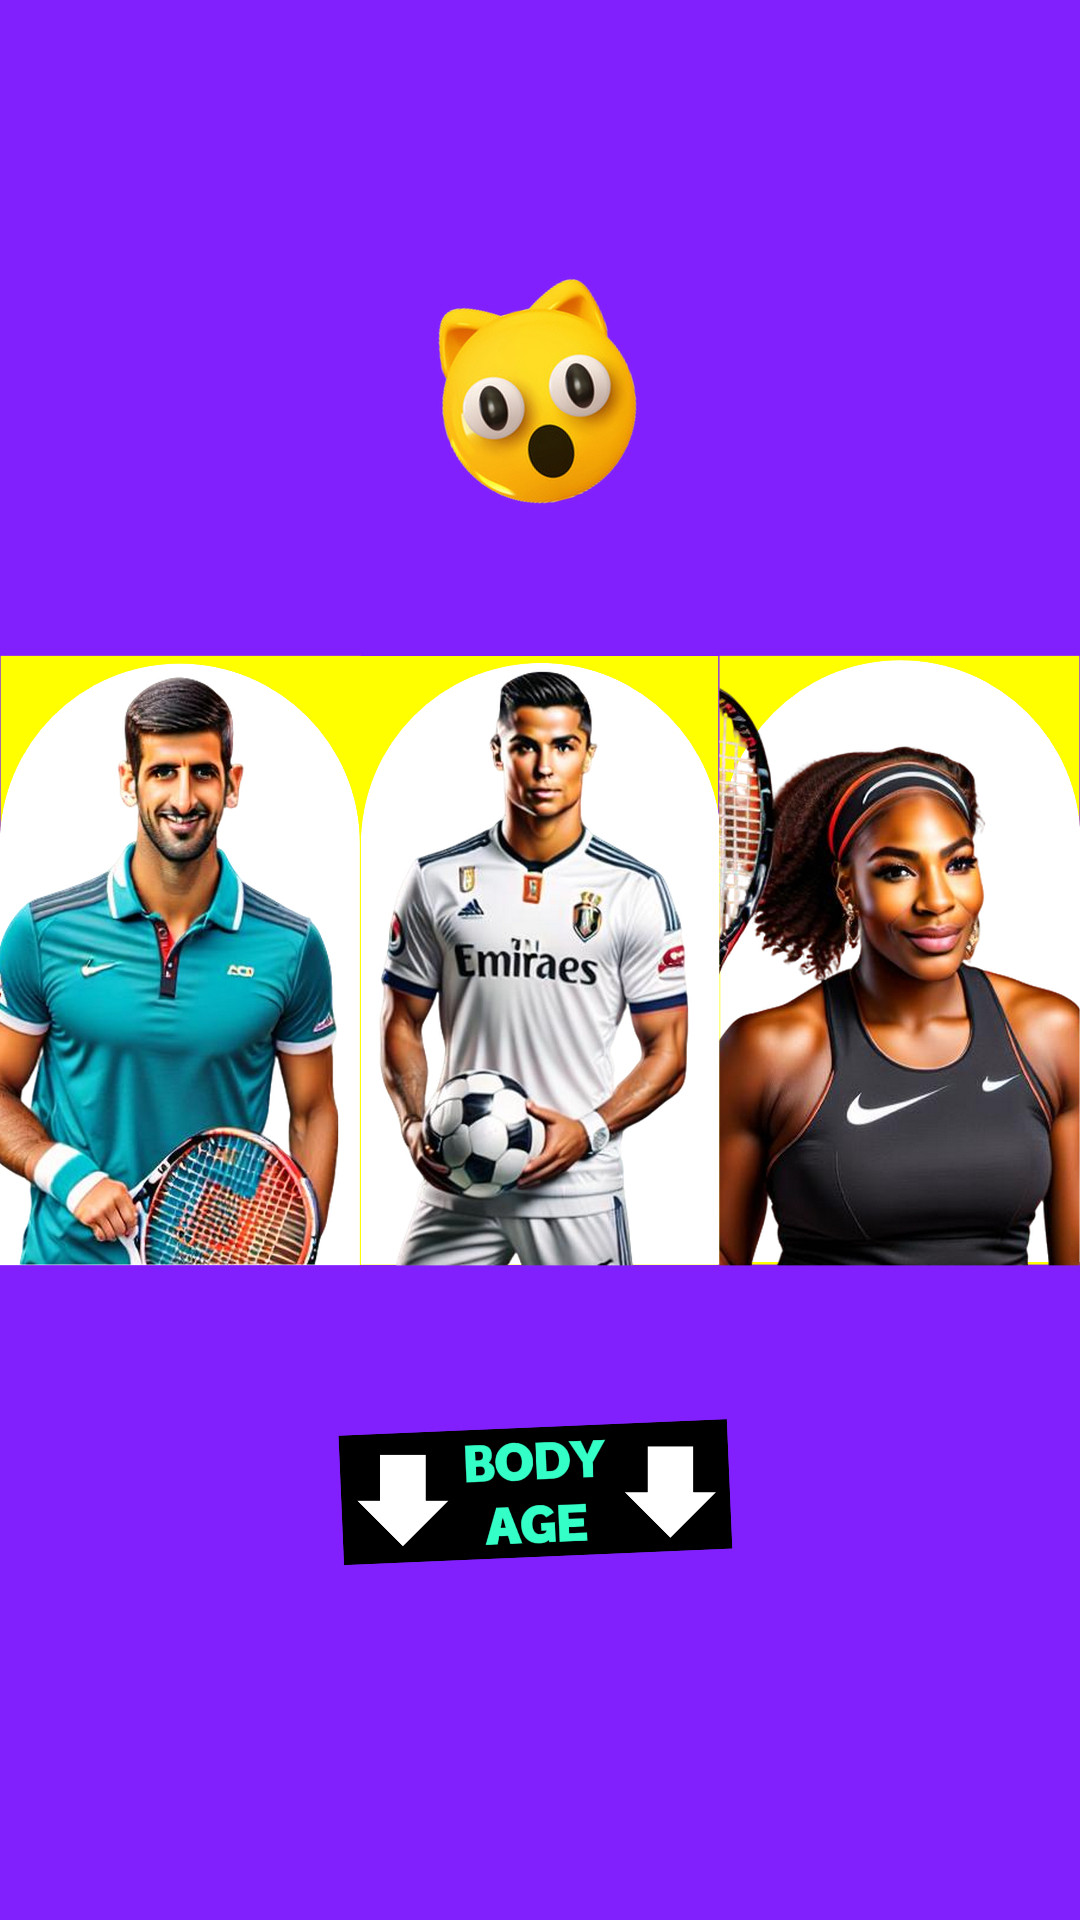 Novak Djokovic, Cristiano Ronaldo, Serena Williams. Athletes who competed and won at an age well beyond what's normal in their sport